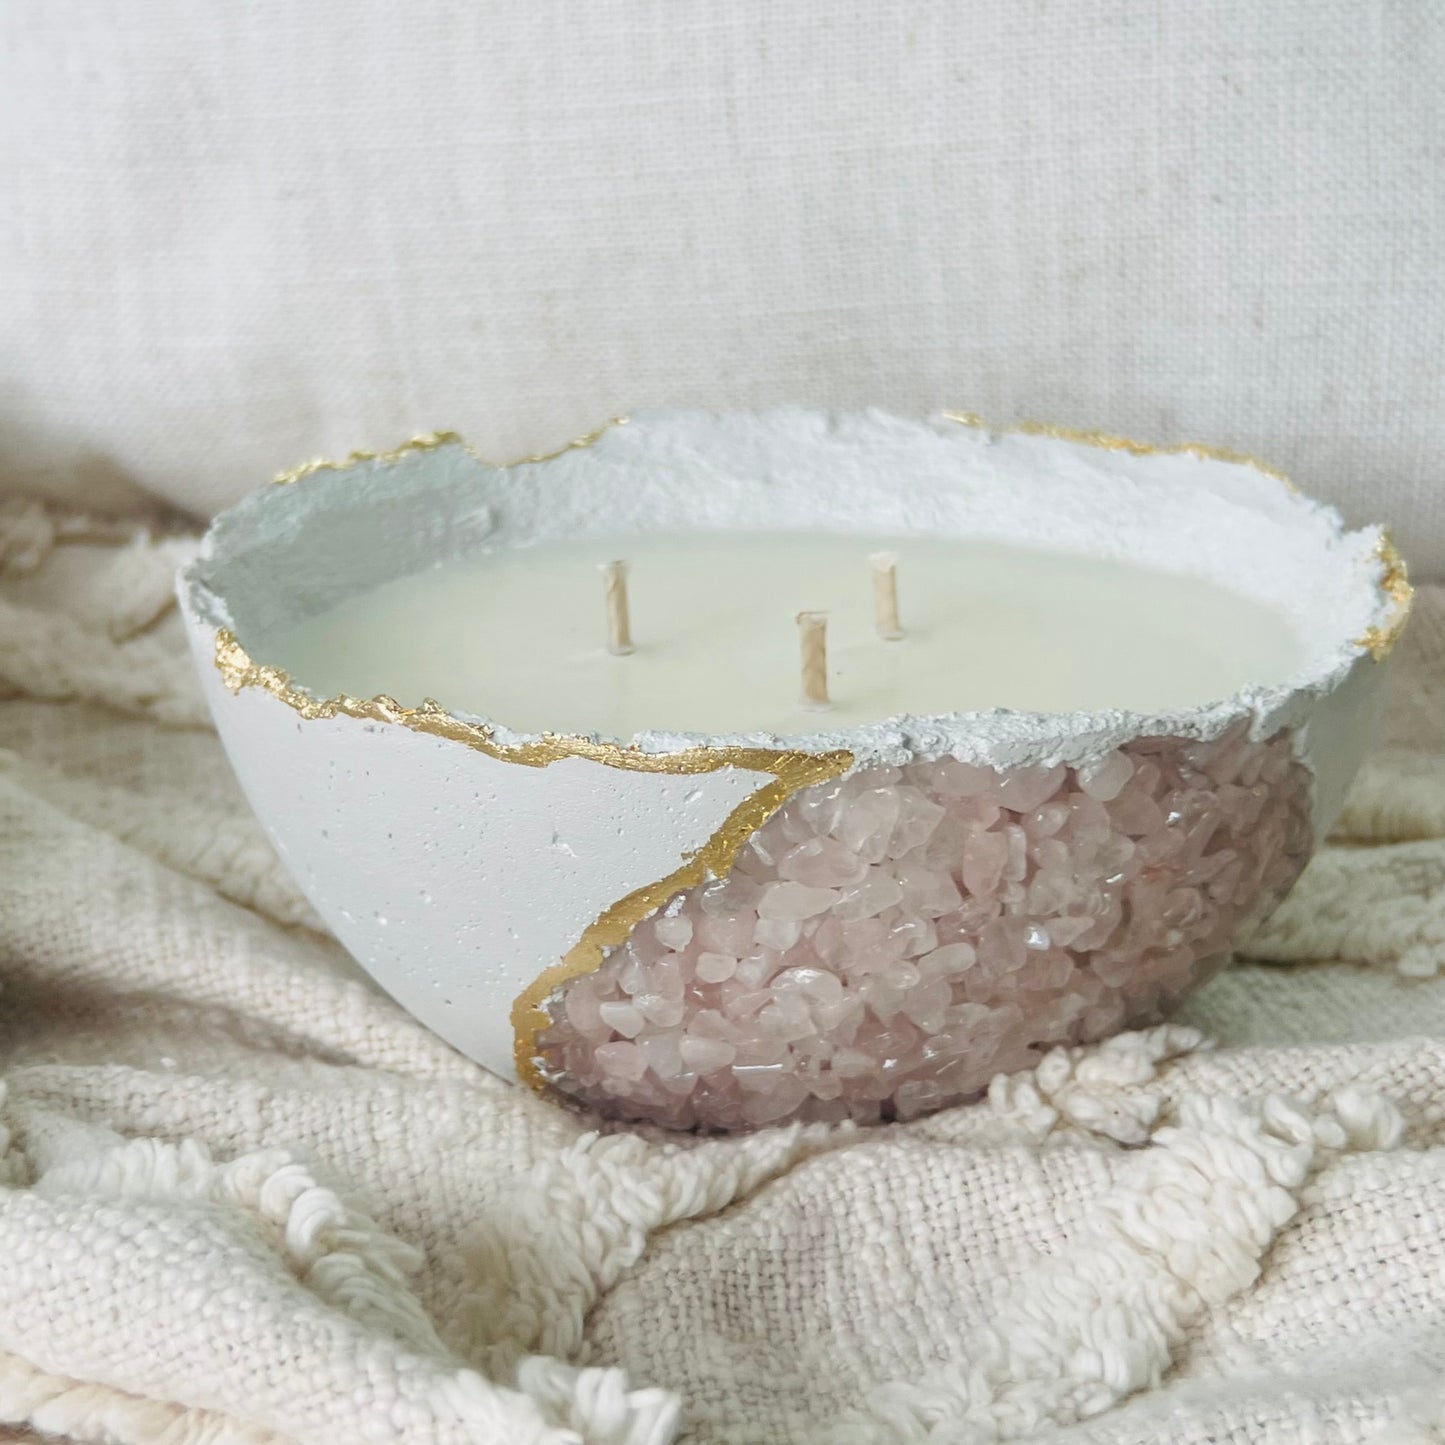 DIY FAUX WOODEN DOUGH BOWL CANDLE - Decorate with Tip and More